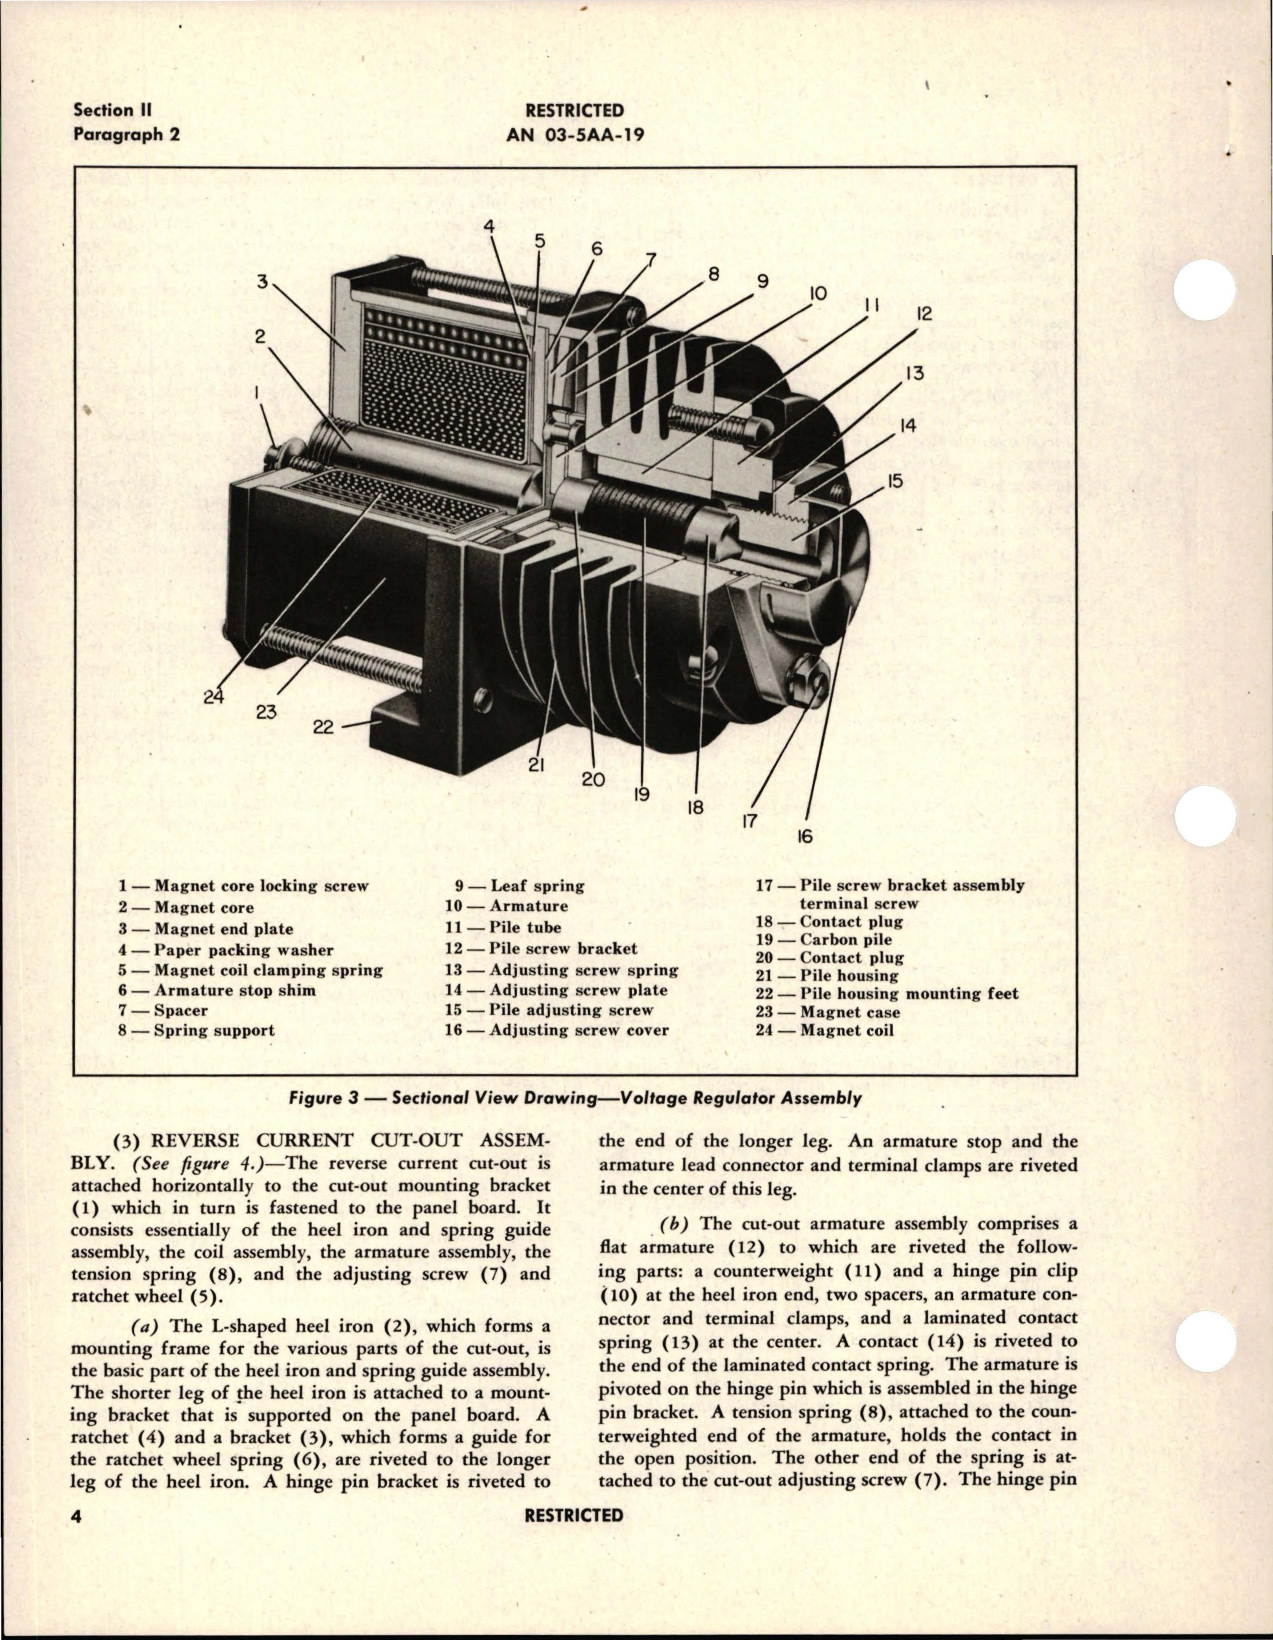 Sample page 8 from AirCorps Library document: Operation, Service and Overhaul Instructions with Parts Catalog for DC Generator Control Panels - AAF Type B-1-B - Eclipse Type 1202 and 1427